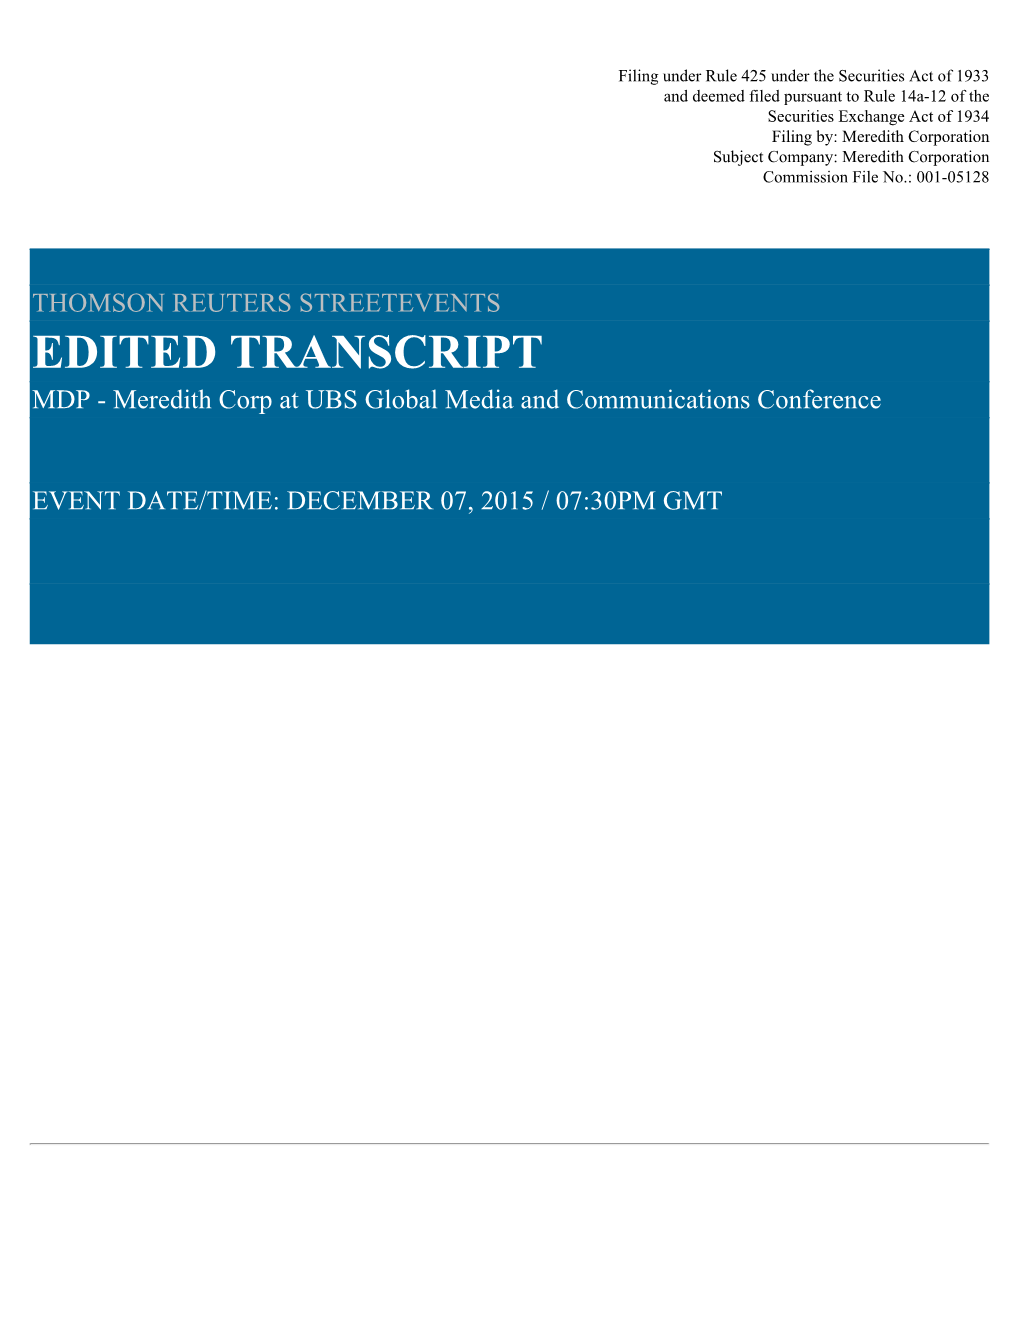 EDITED TRANSCRIPT MDP - Meredith Corp at UBS Global Media and Communications Conference